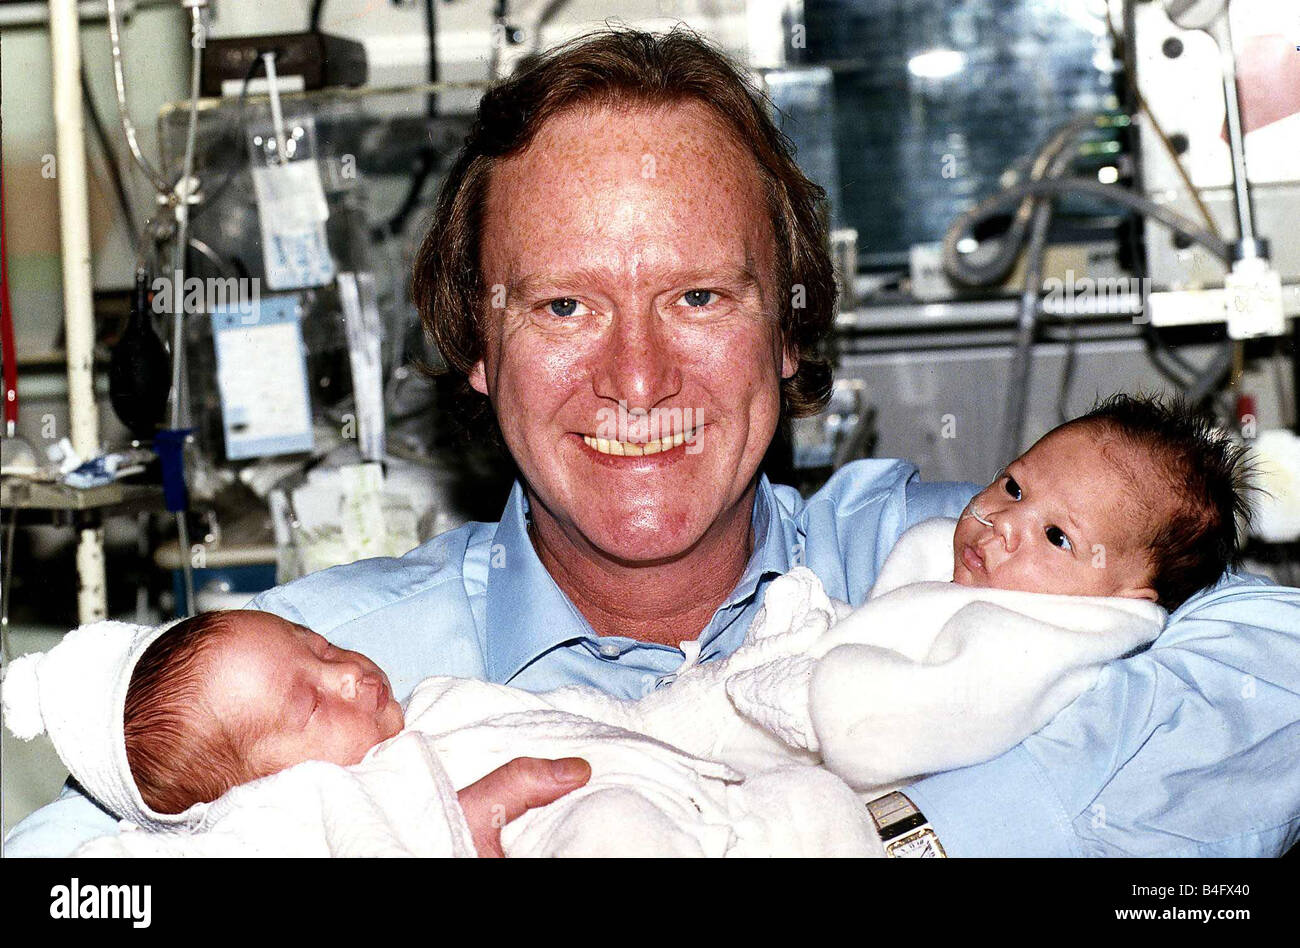 Denis Waterman Actor with two babies that were born premature at Guy s Hospital Evelina Childrens Unit l r Jack Davies 6 wks old and Lewis Barra 7 wks old Denis visited the unit at the start of Guy s sponsor a cot appeal Dbase Mirrorpix Stock Photo